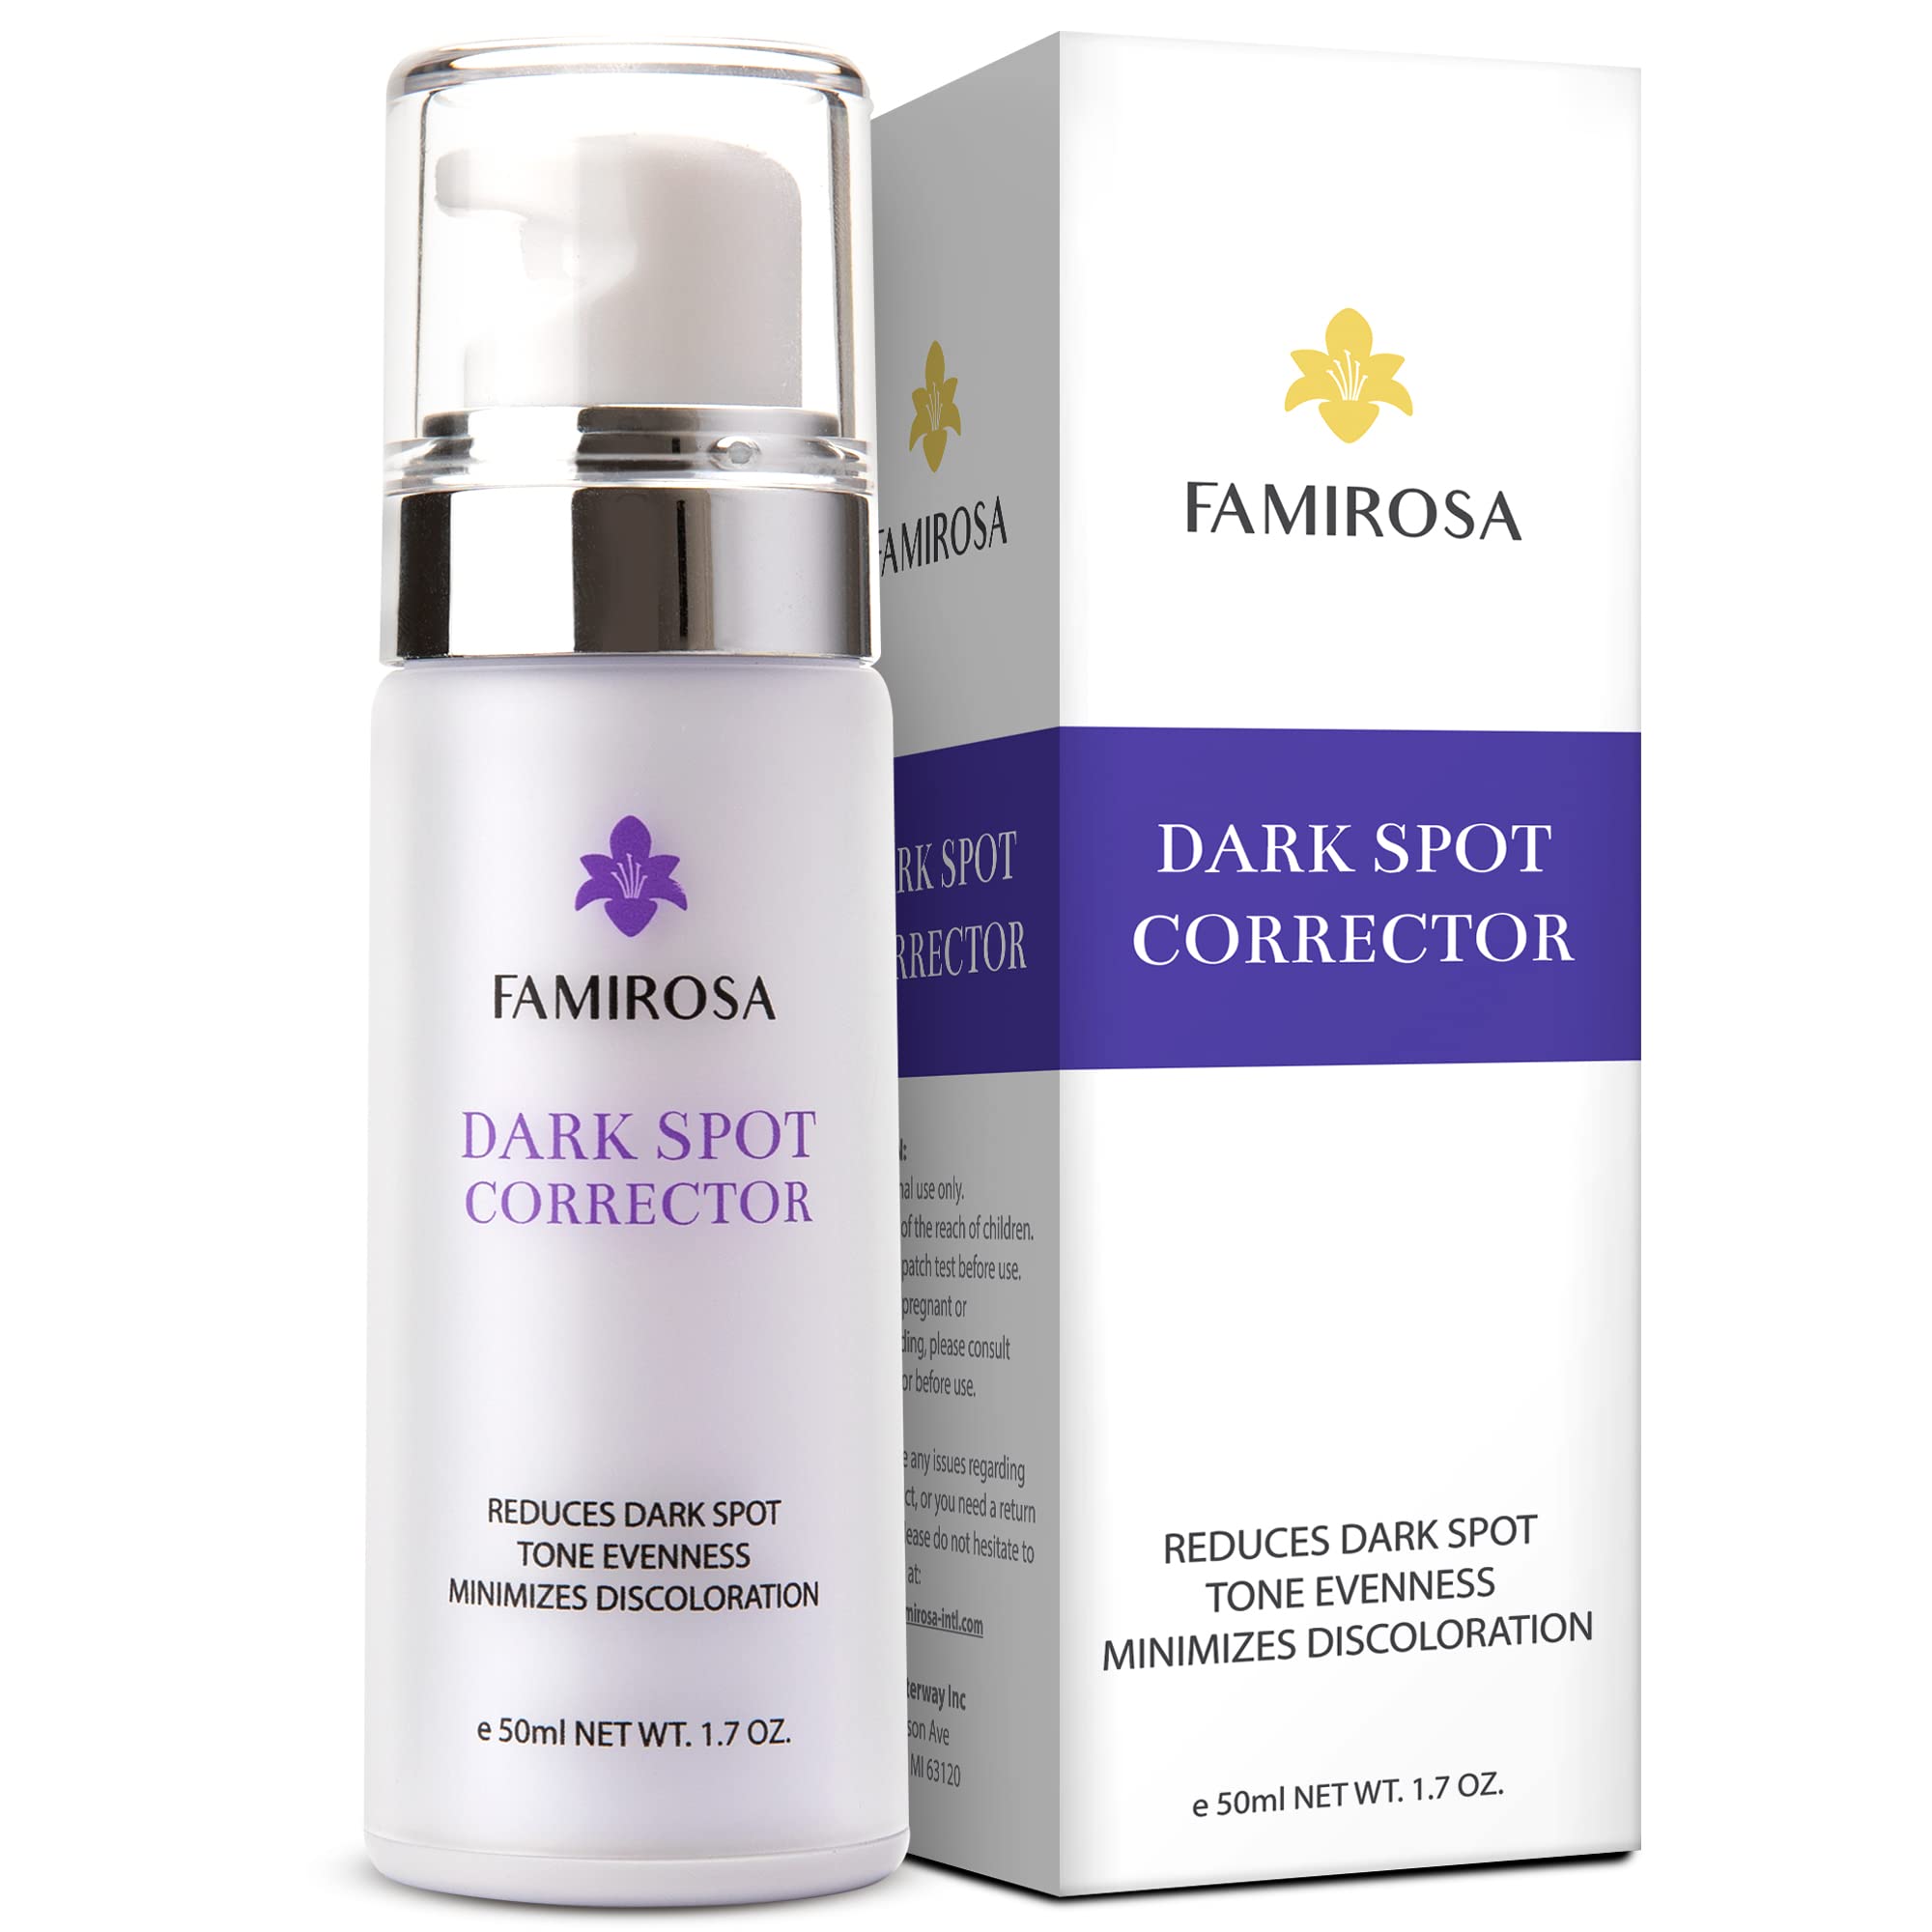 Farmirosa Dark Spot Remover Serum for Face and Body, 50ml, with Kojic Acid, Hyaluronic Acid, and 4-Butylresorcinol